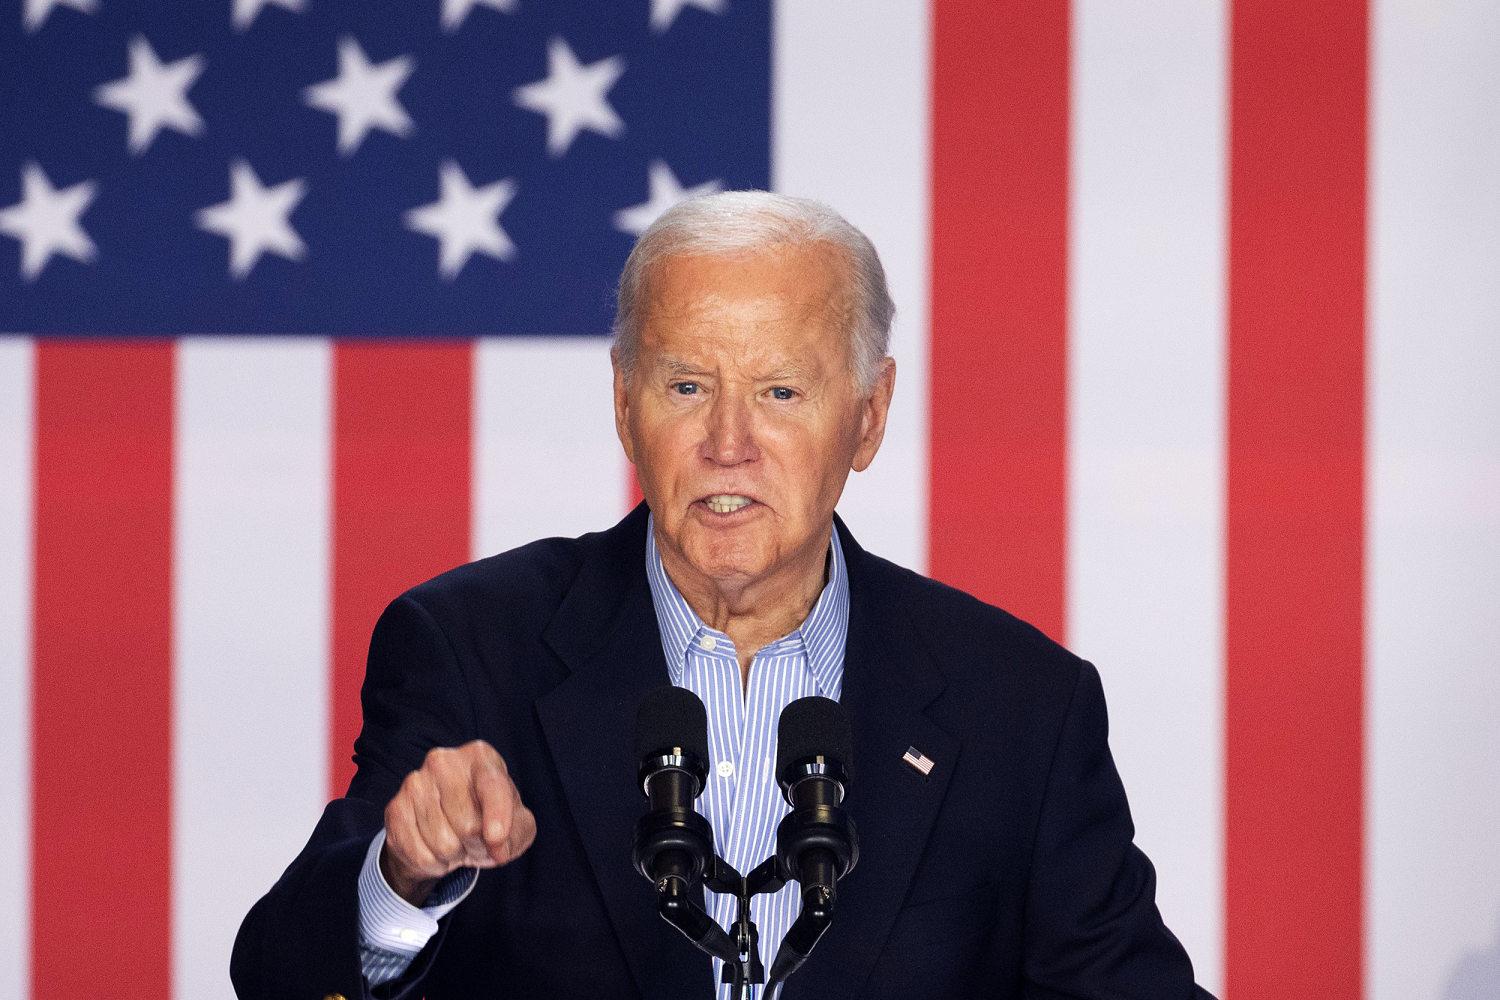 Wisconsin radio network said it edited out parts of Biden interview at his campaign's request